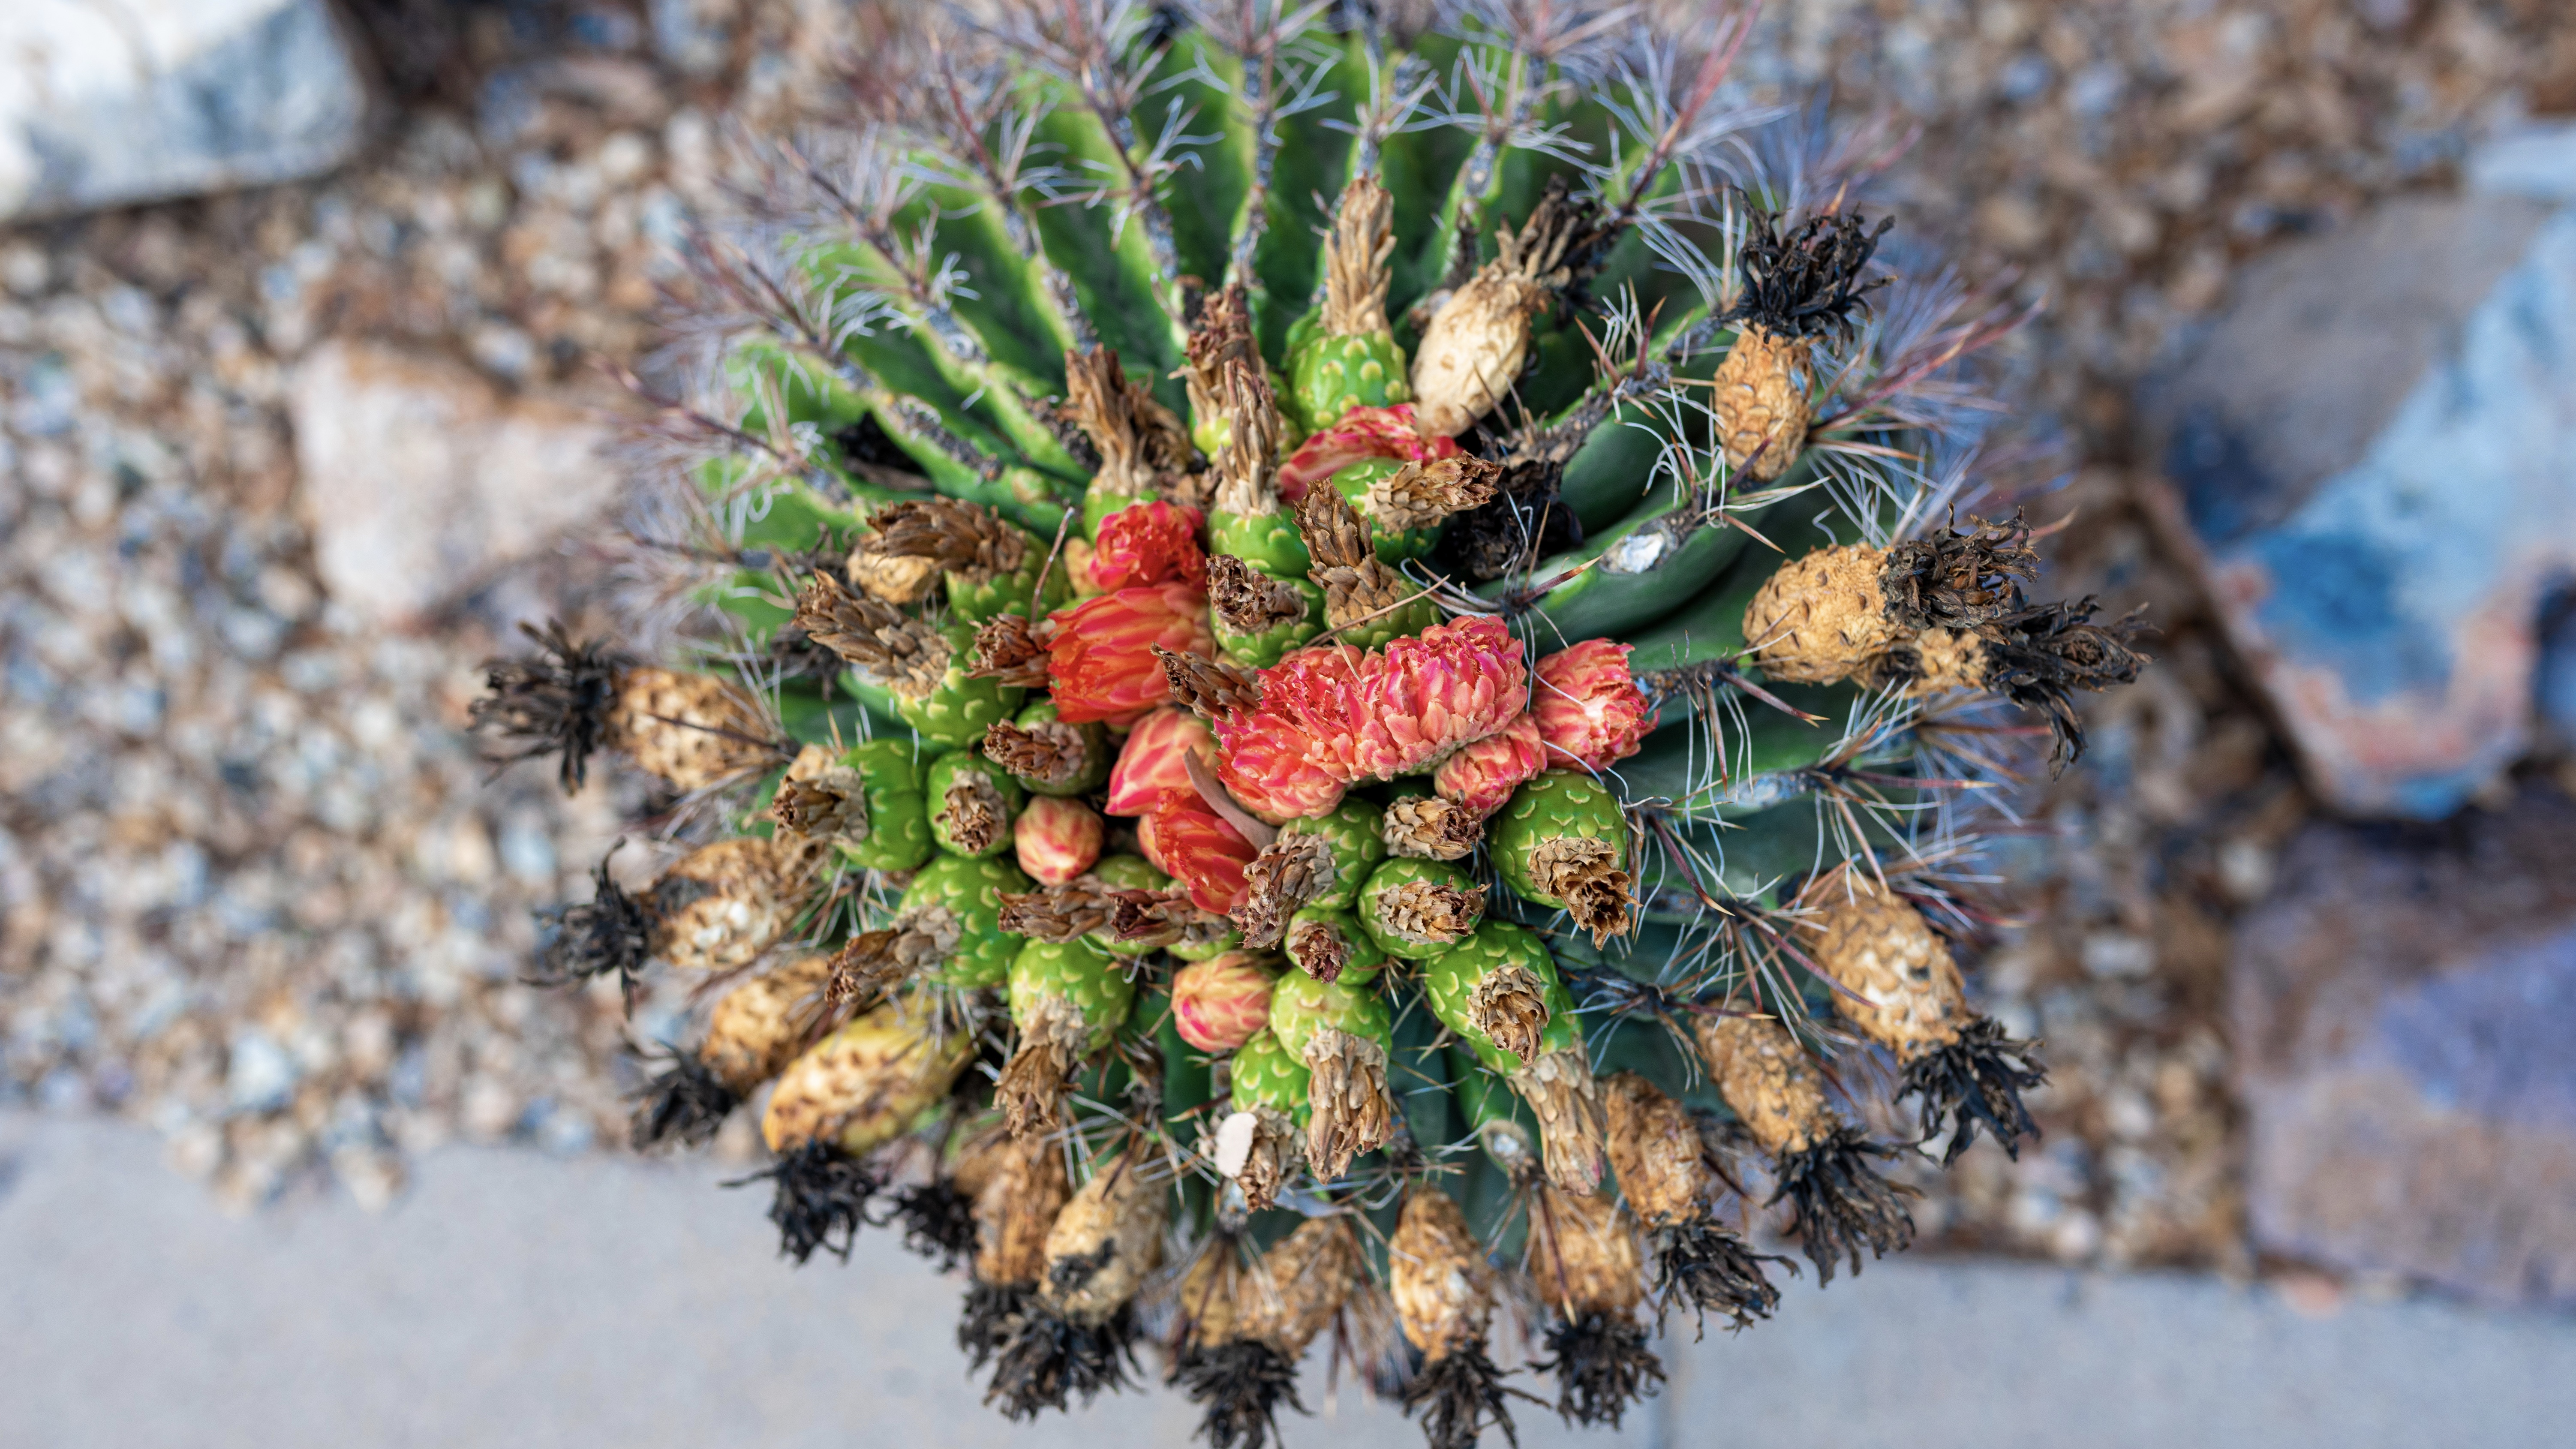 A photo of a green cactus with red flowers